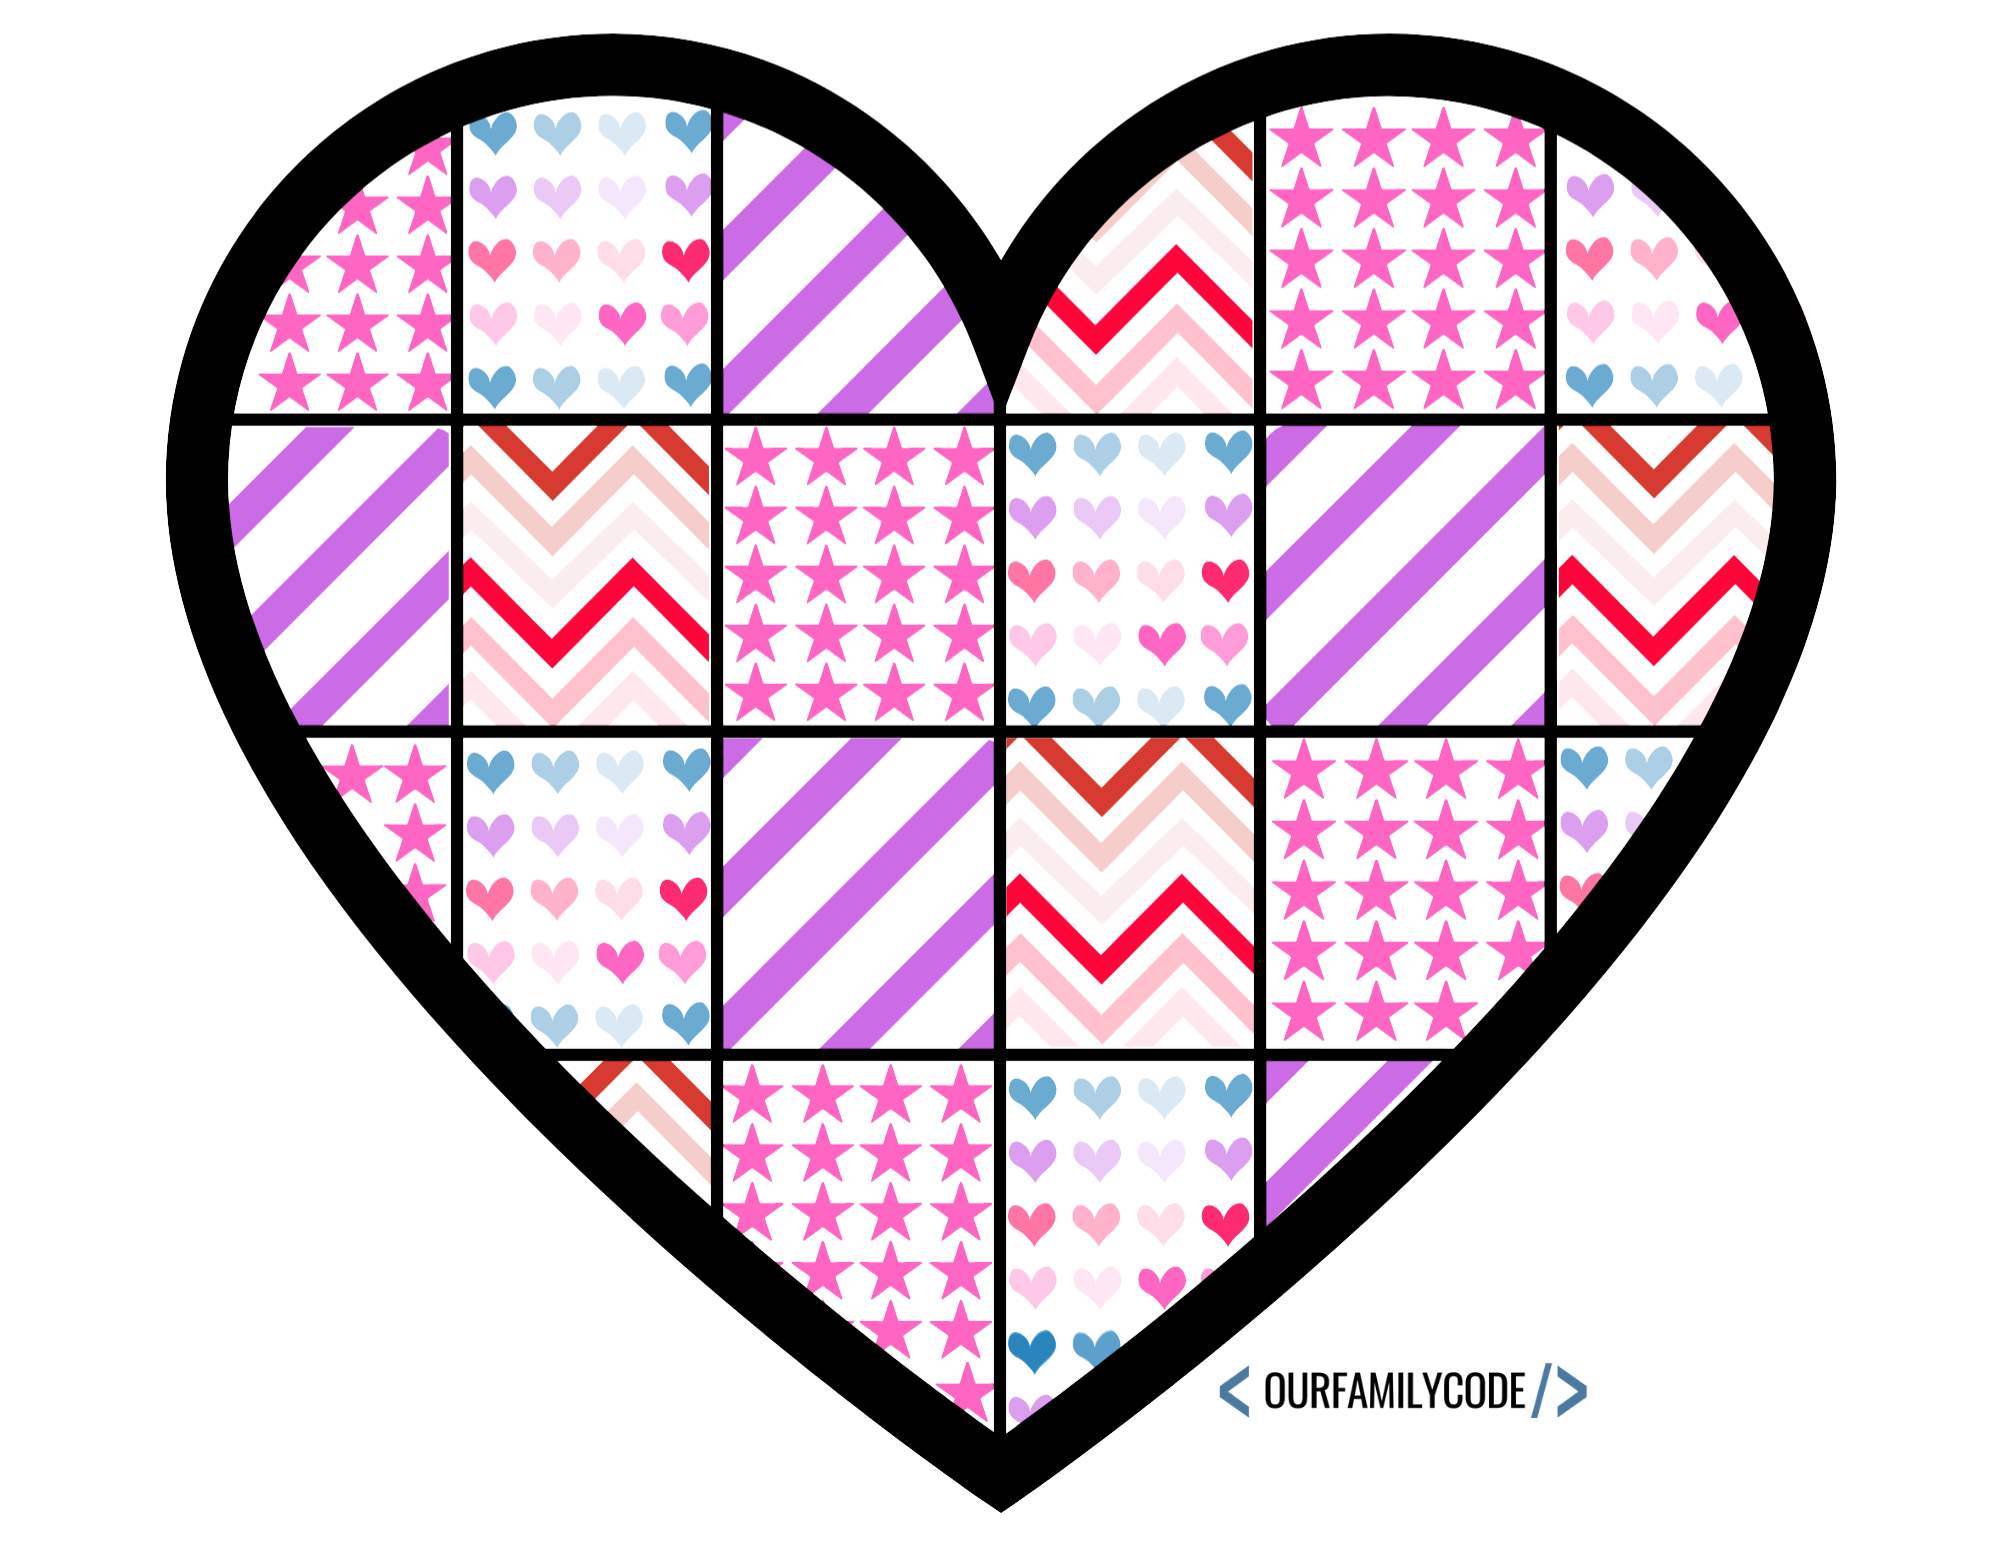 A picture of a digital Patchwork Heart Logic Activity completed.